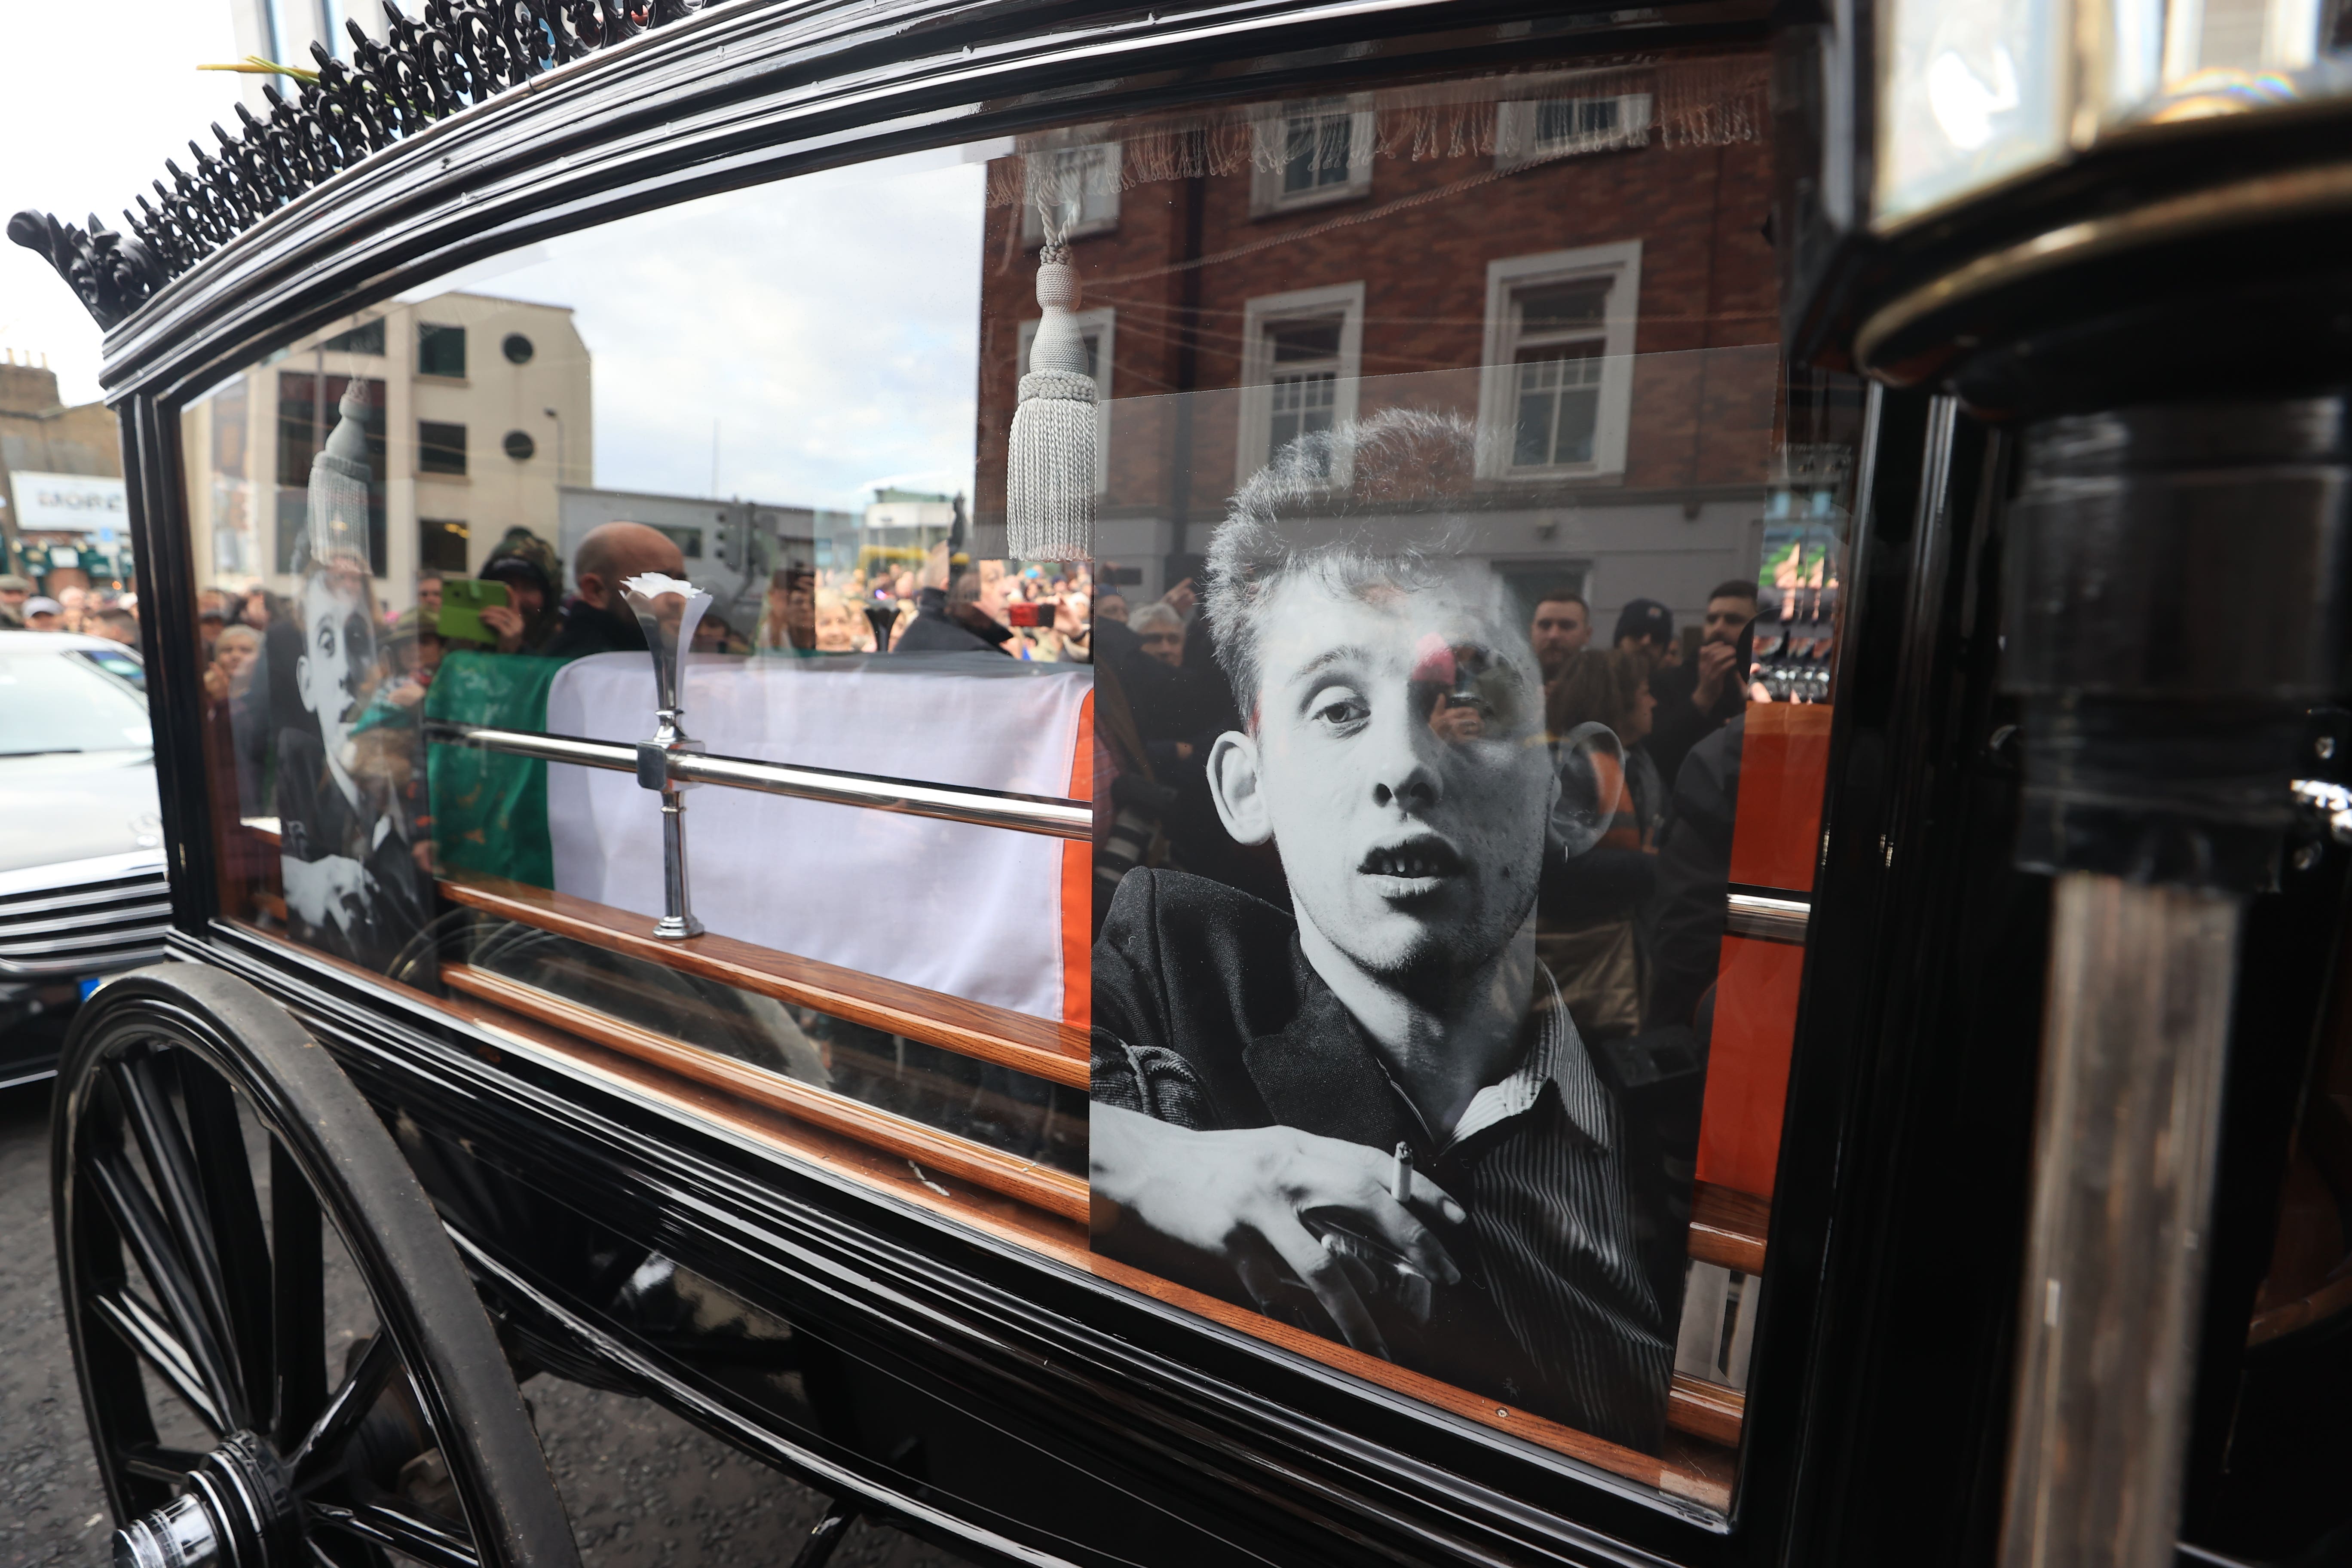 Members of the public lined the streets of Dublin in December to remember Pogues frontman Shane MacGowan, who died in November aged 65 (Liam McBurney/PA)